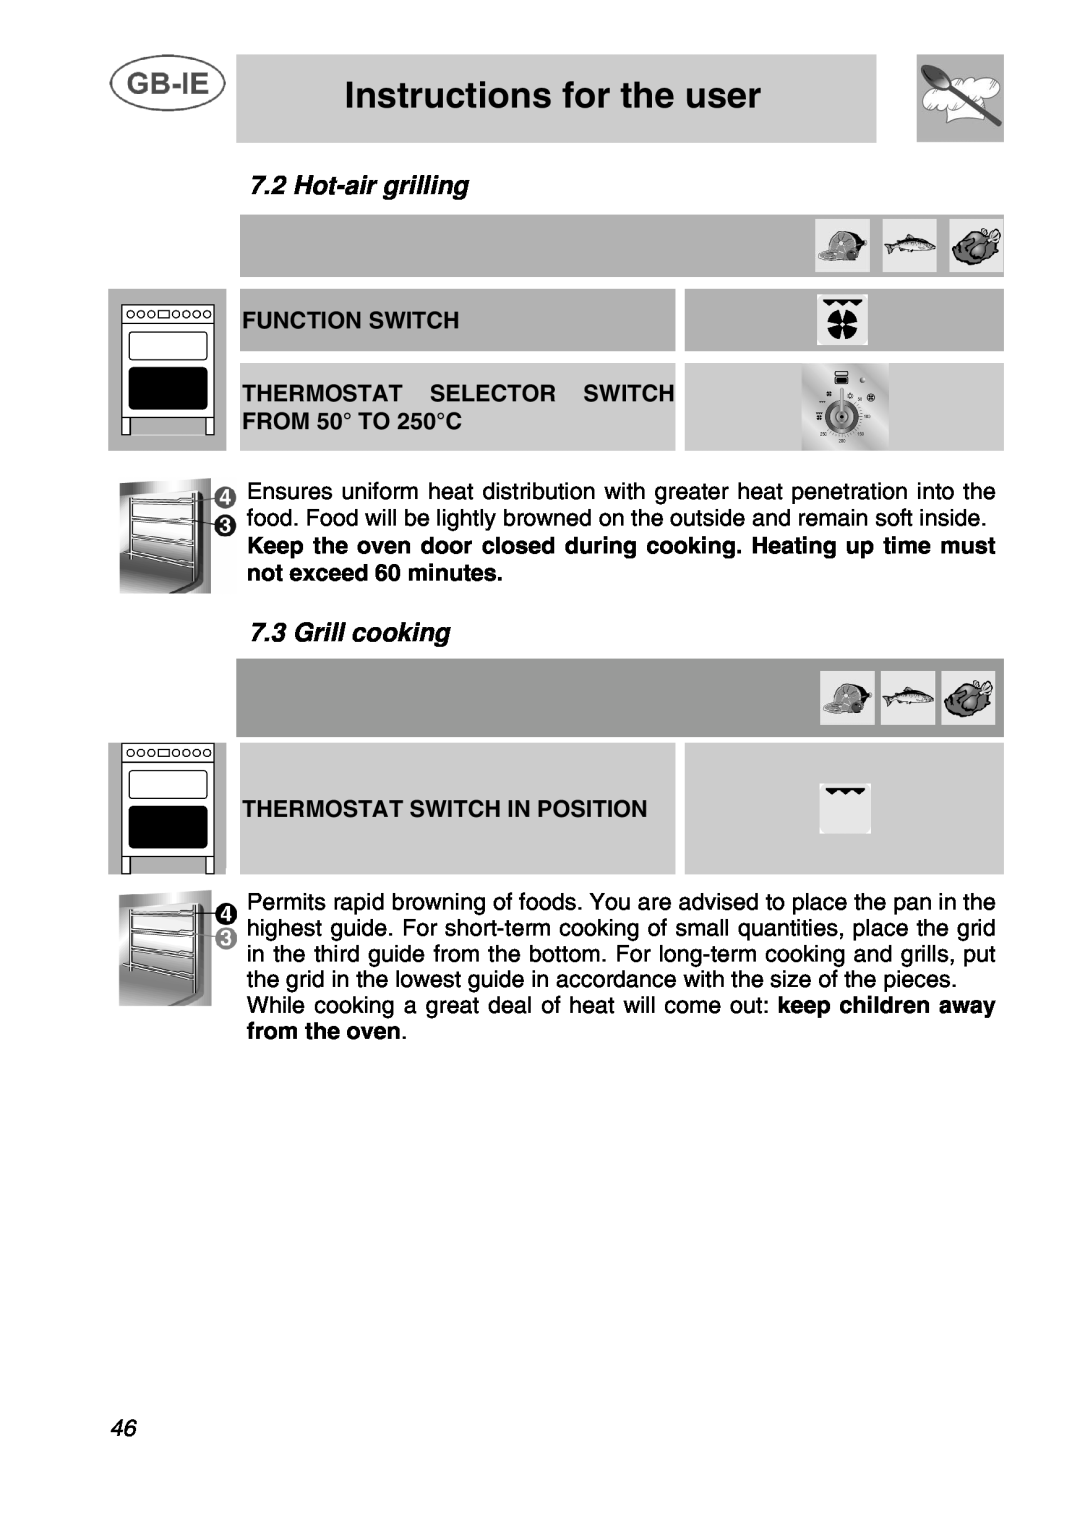 Smeg A42C instruction manual Hot-air grilling, Grill cooking, Thermostat Switch In Position, Instructions for the user 